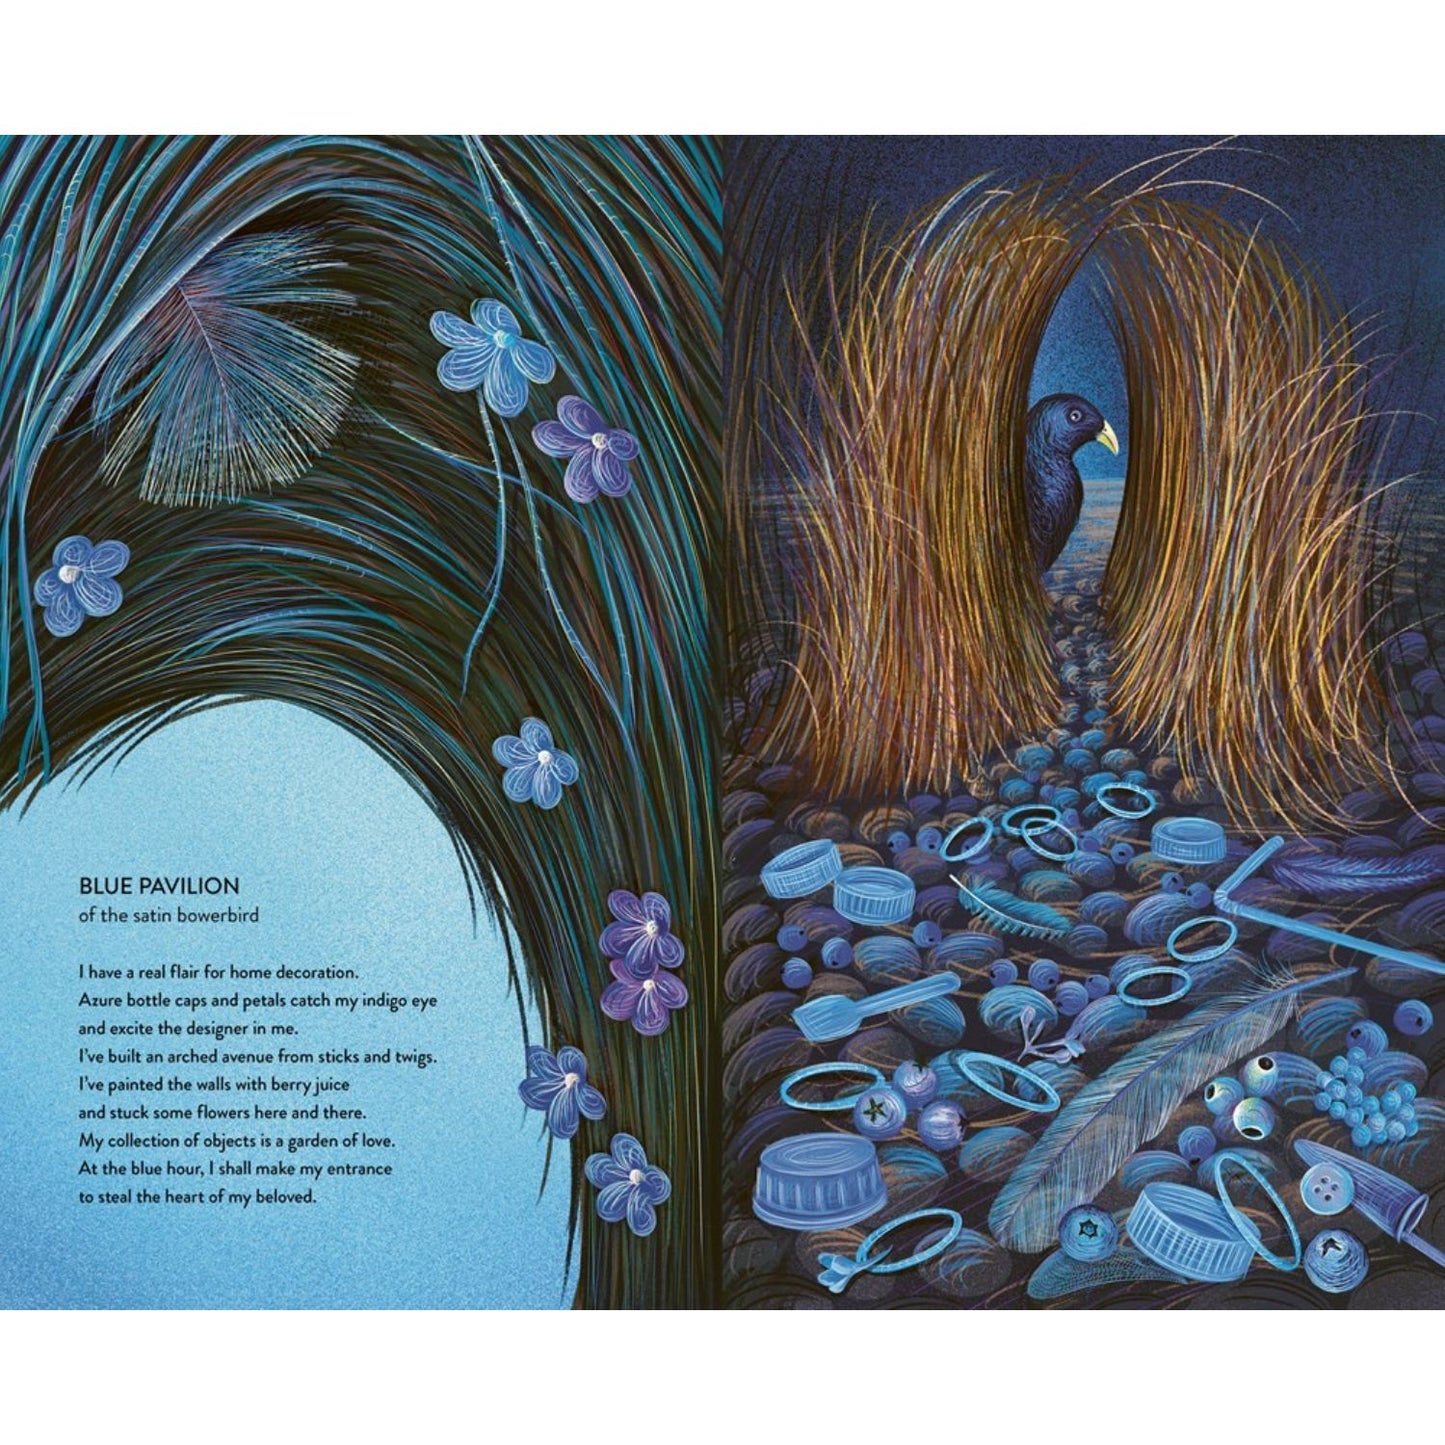 Home | Hardcover | Children’s Book on Nature